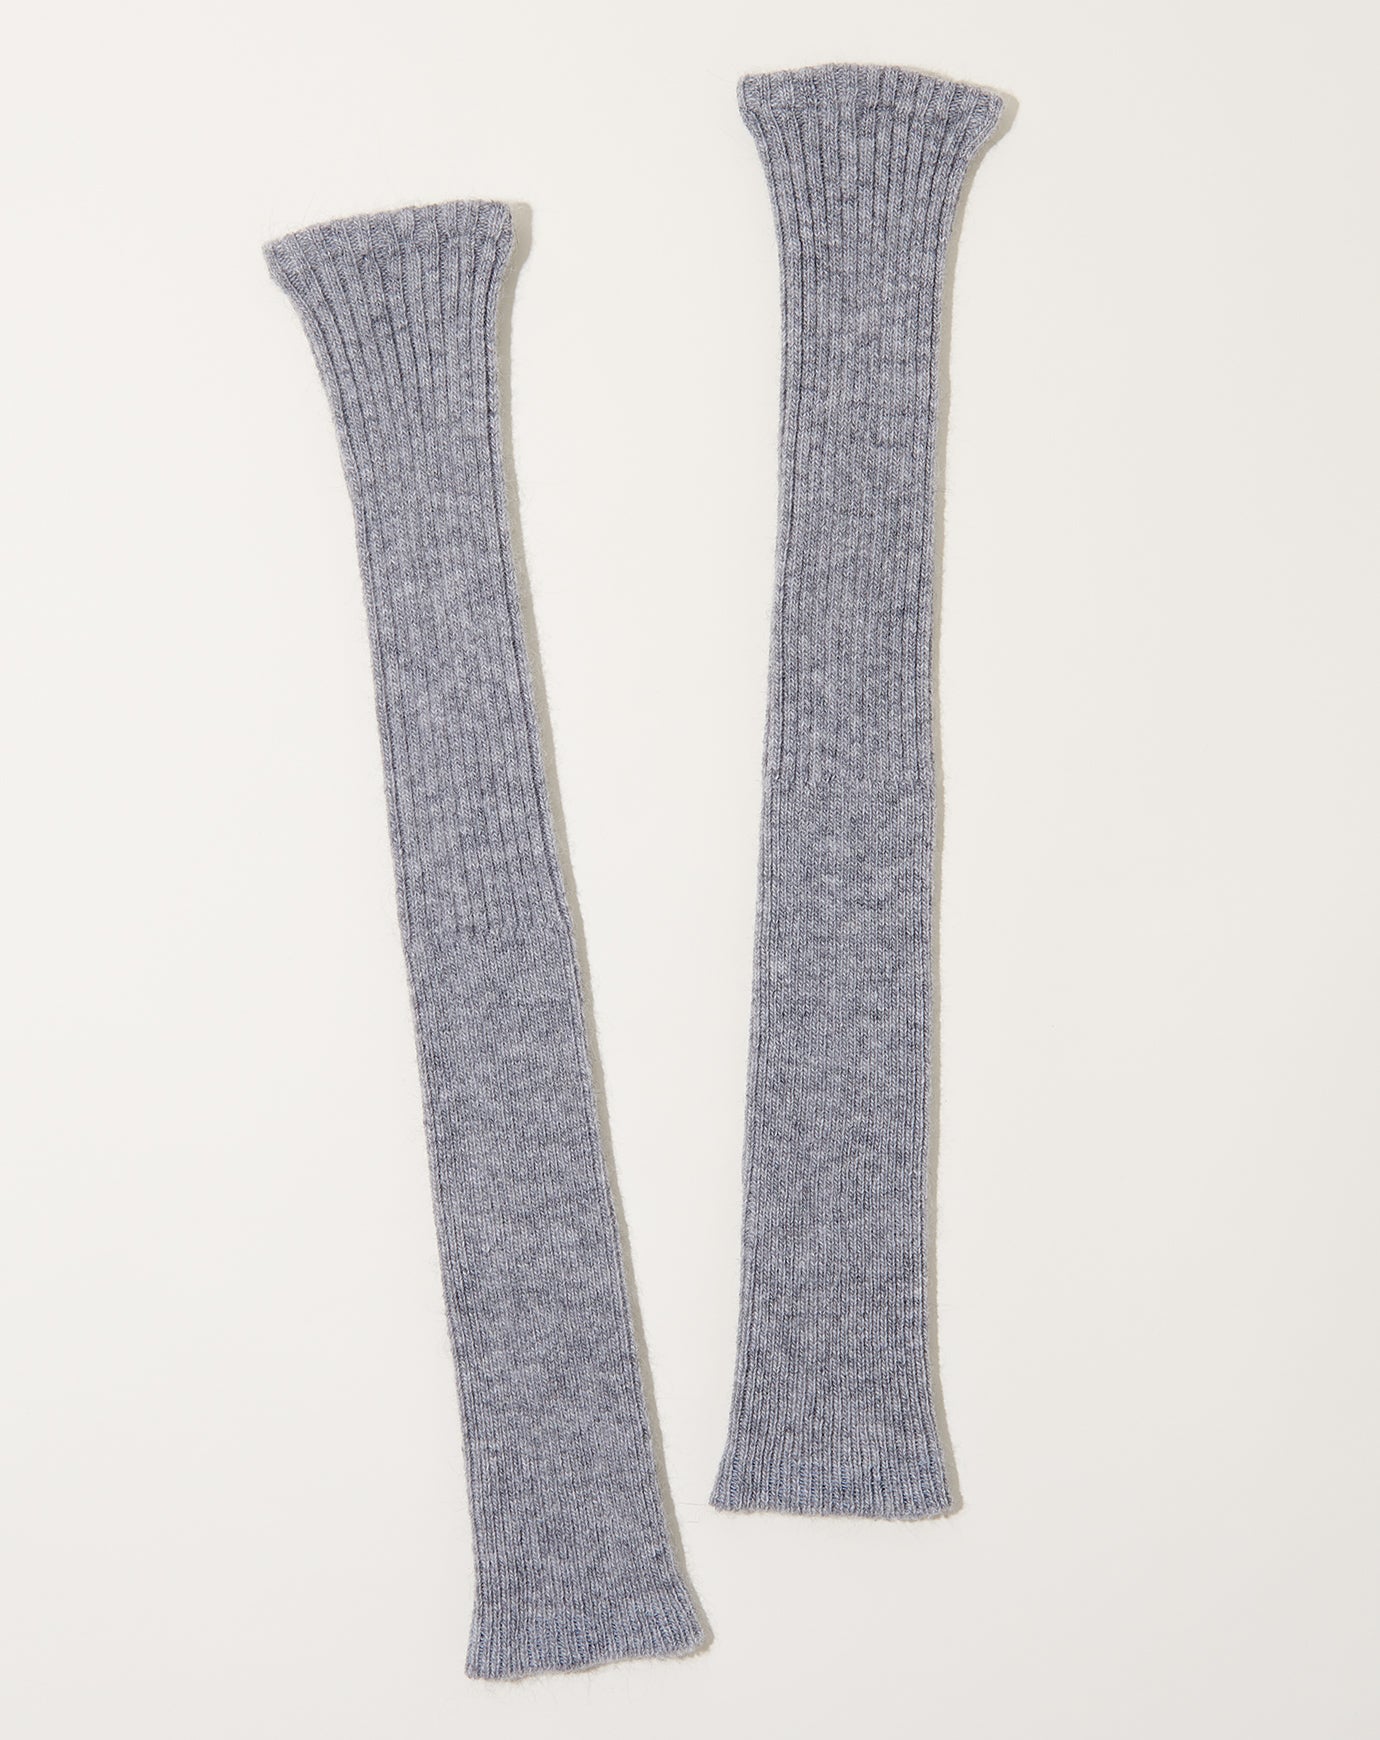 Angel Wool Leg Warmers in Gray – HIGHLY SENSITIVE PERSON